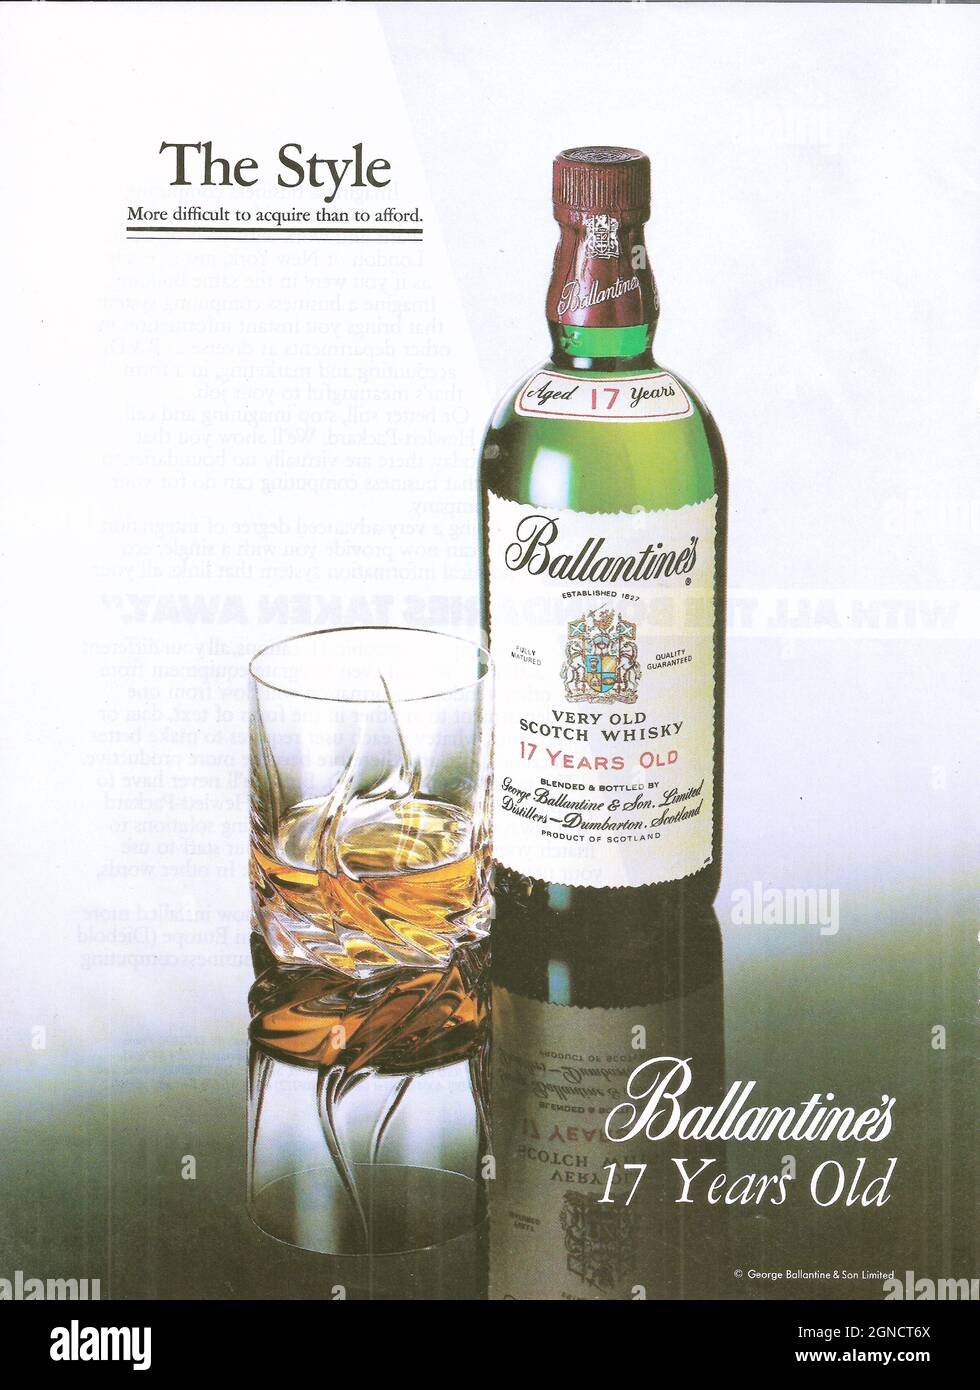 Vintage advertisement of Ballantines whiskey whisky scotch ballantines bottle and glass paper advert magazine adver 1980s 1970s Stock Photo